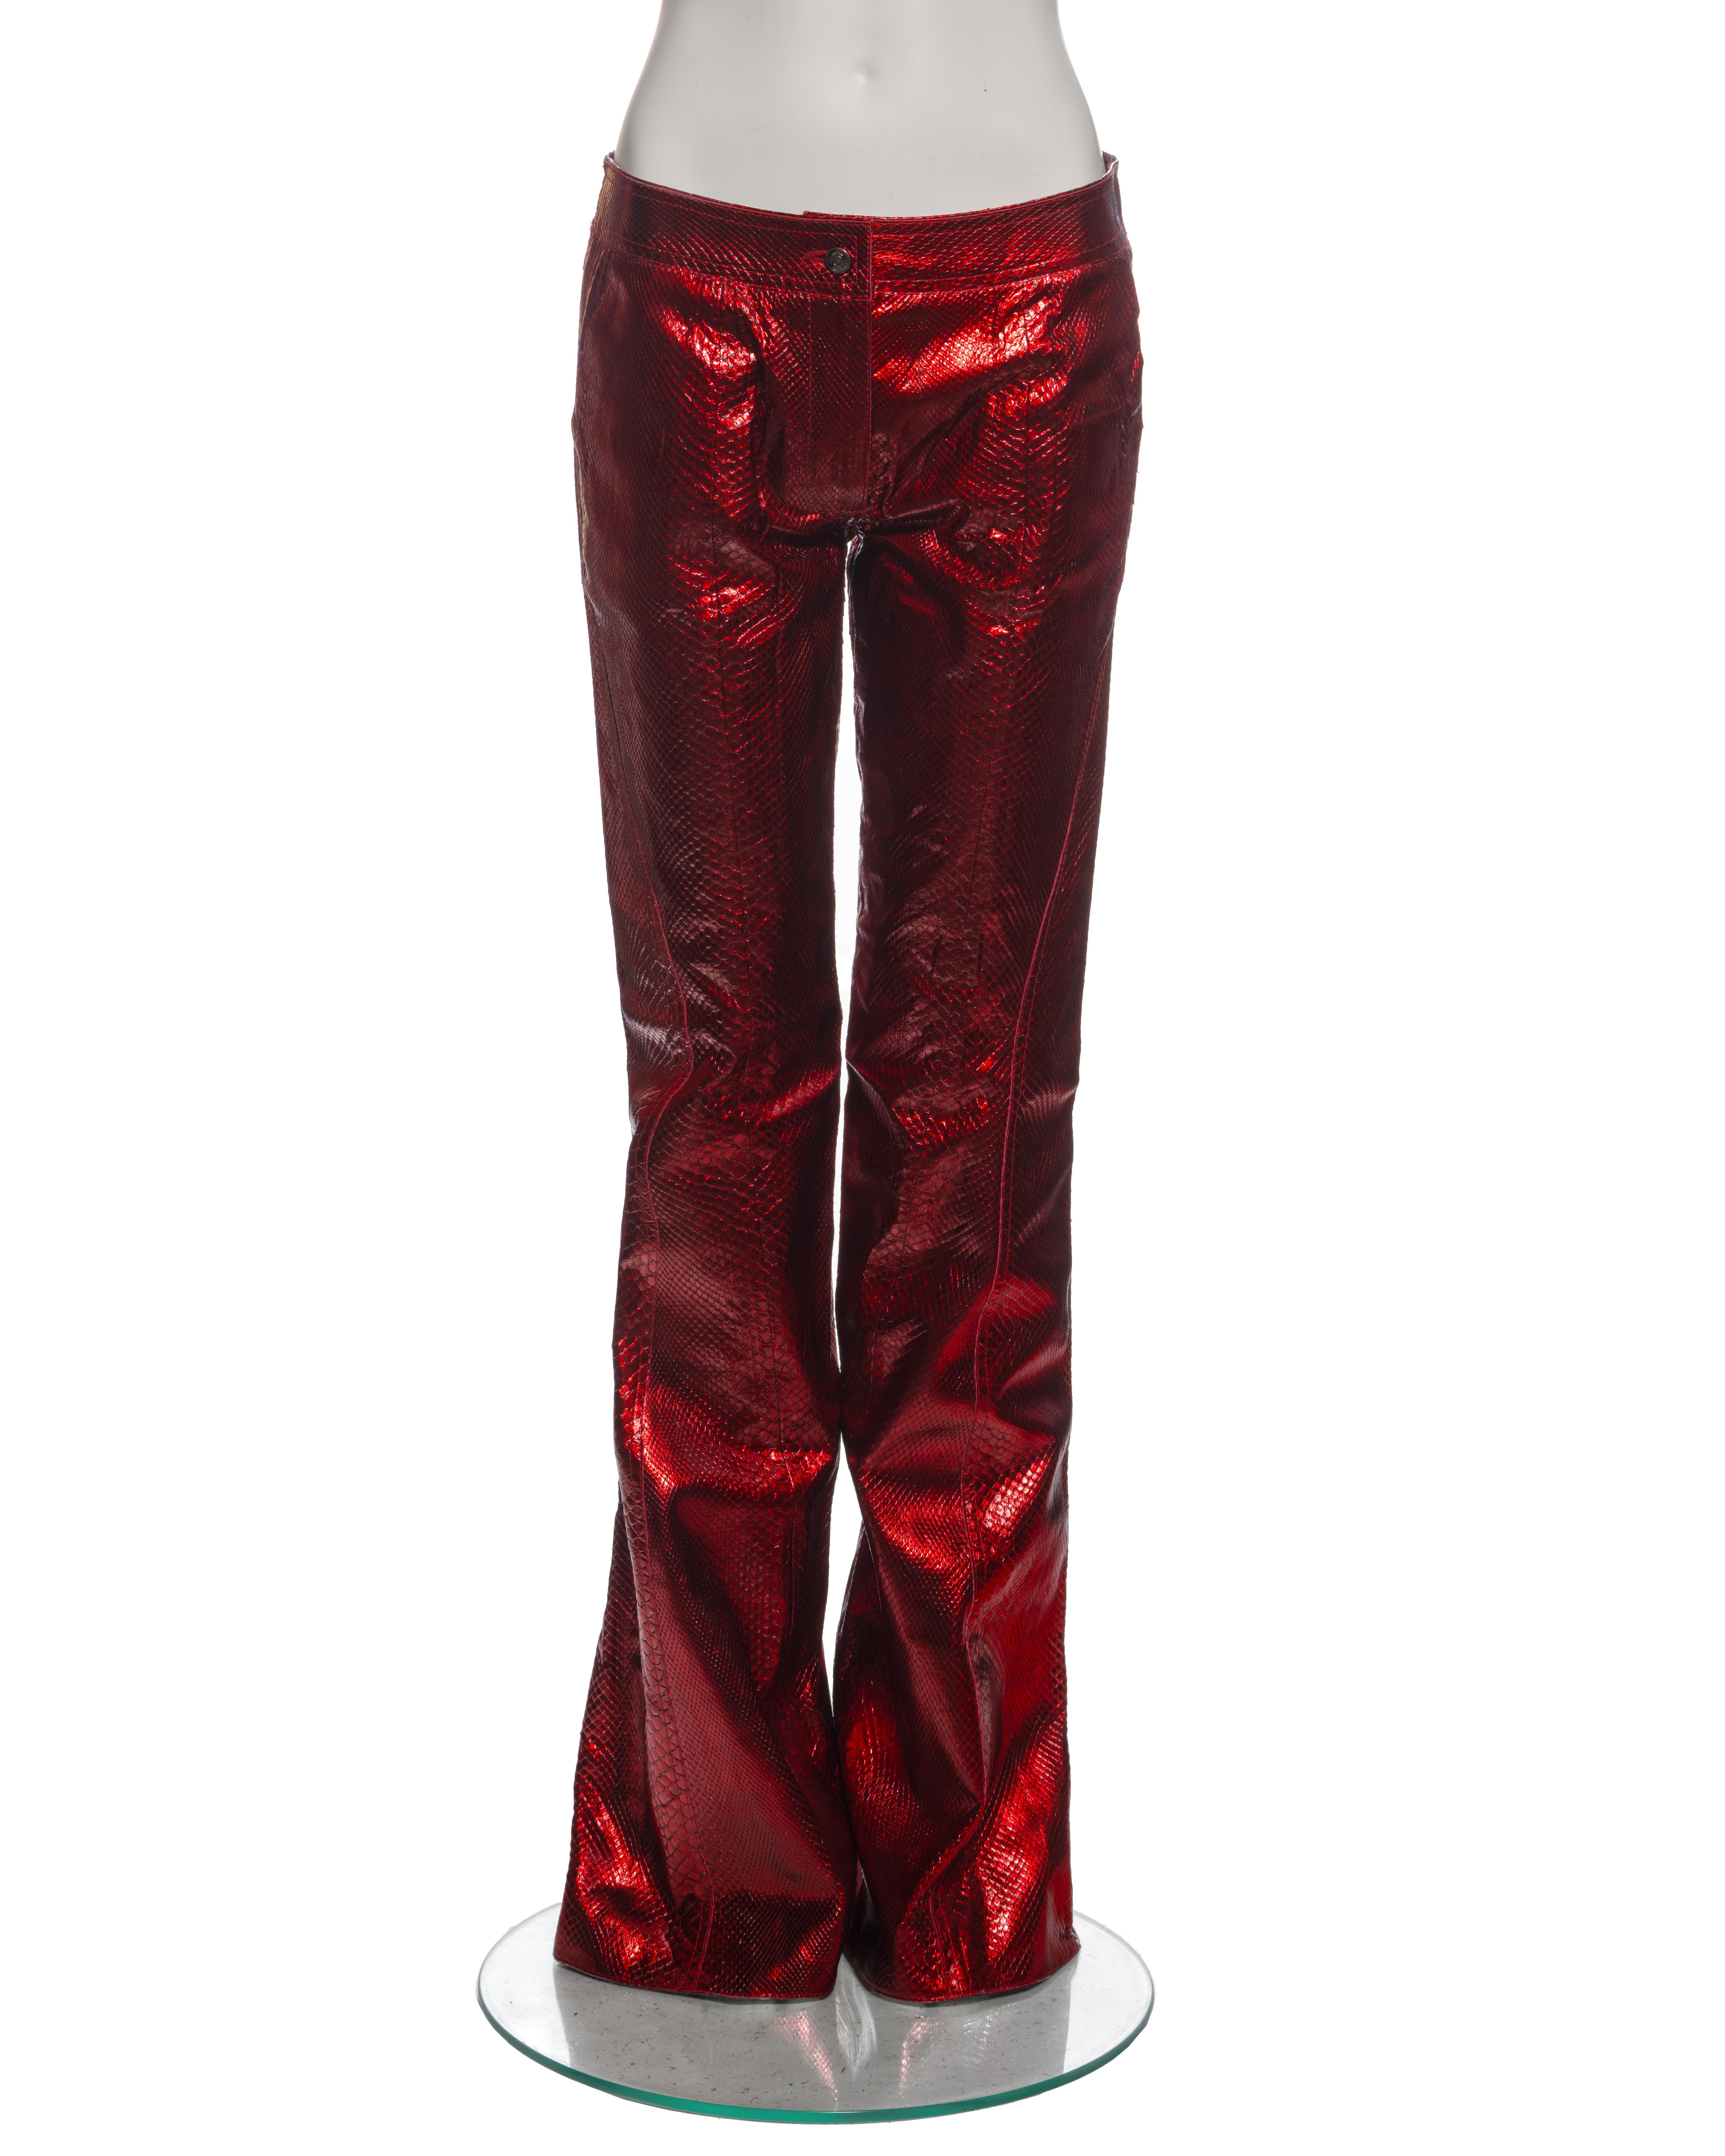 ▪ Archival Christian Dior Flared Trousers
▪ Creative Director: John Galliano
▪ Spring-Summer 2002
▪ Sold by One of a Kind Archive
▪ Crafted from metallic red python leather 
▪ Mid-rise 
▪ Extra long flared cut 
▪ Brand engraved rivet buttons
▪ Red